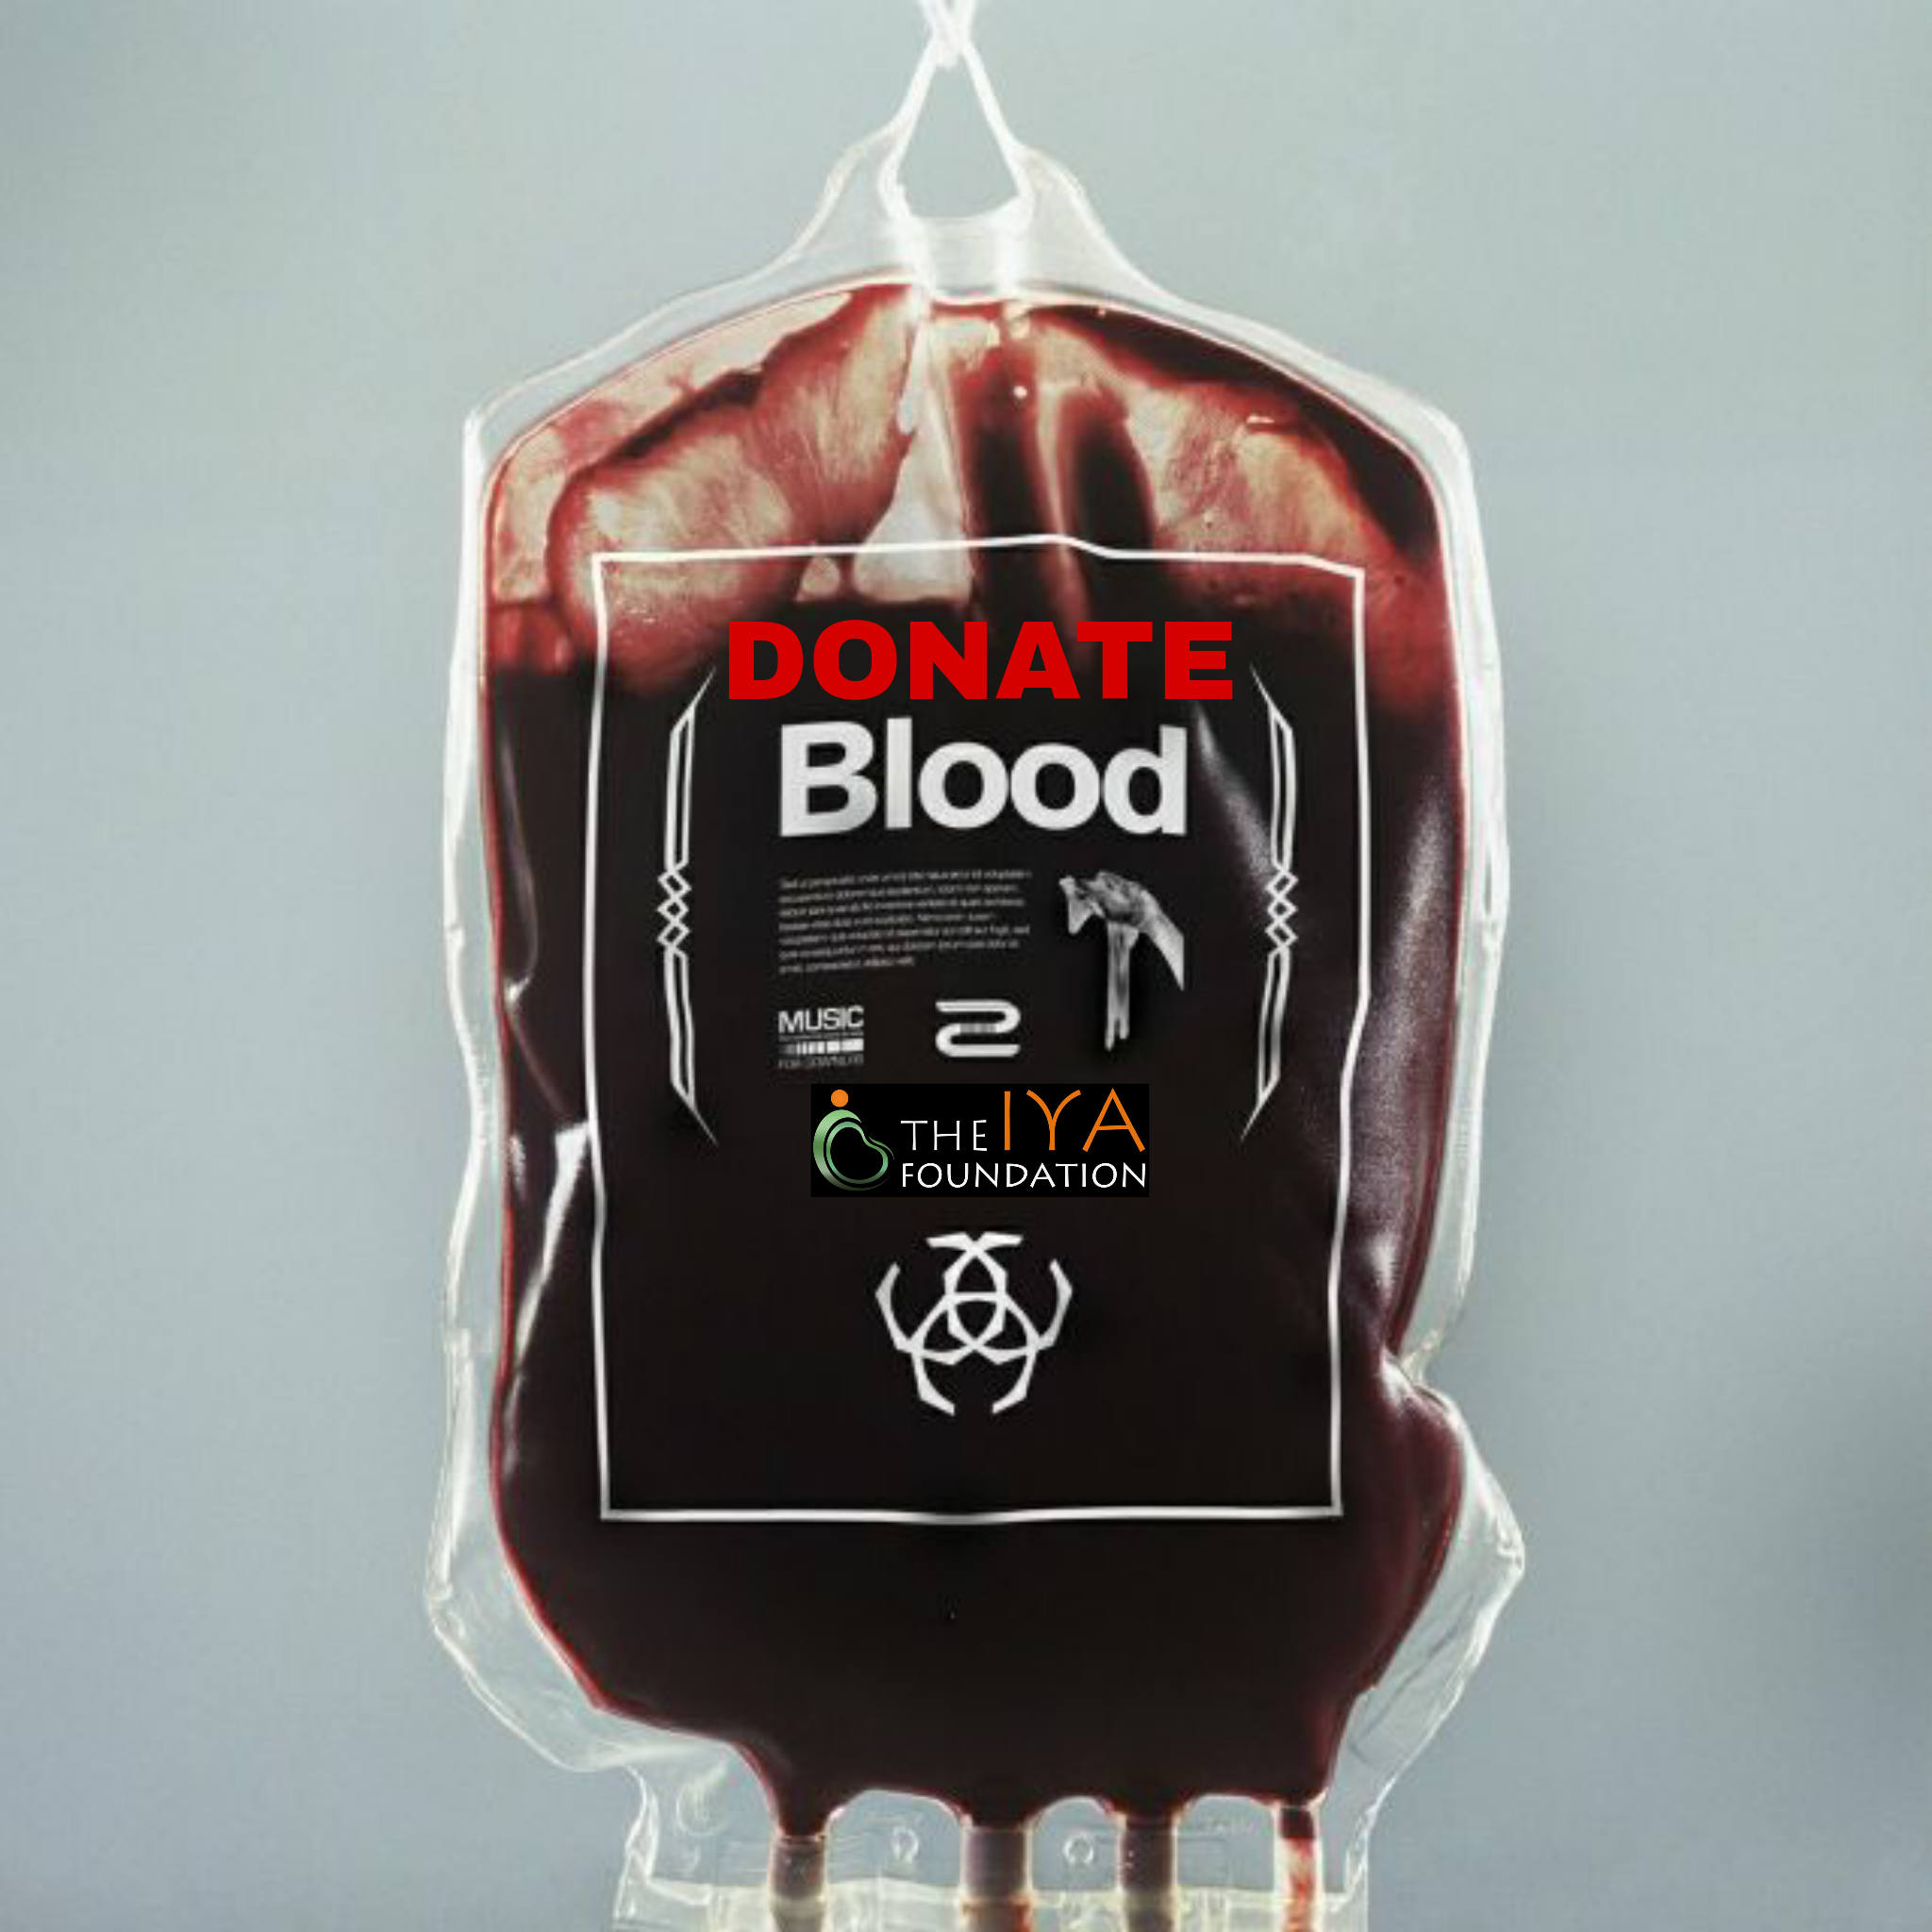 Blood in a Bag